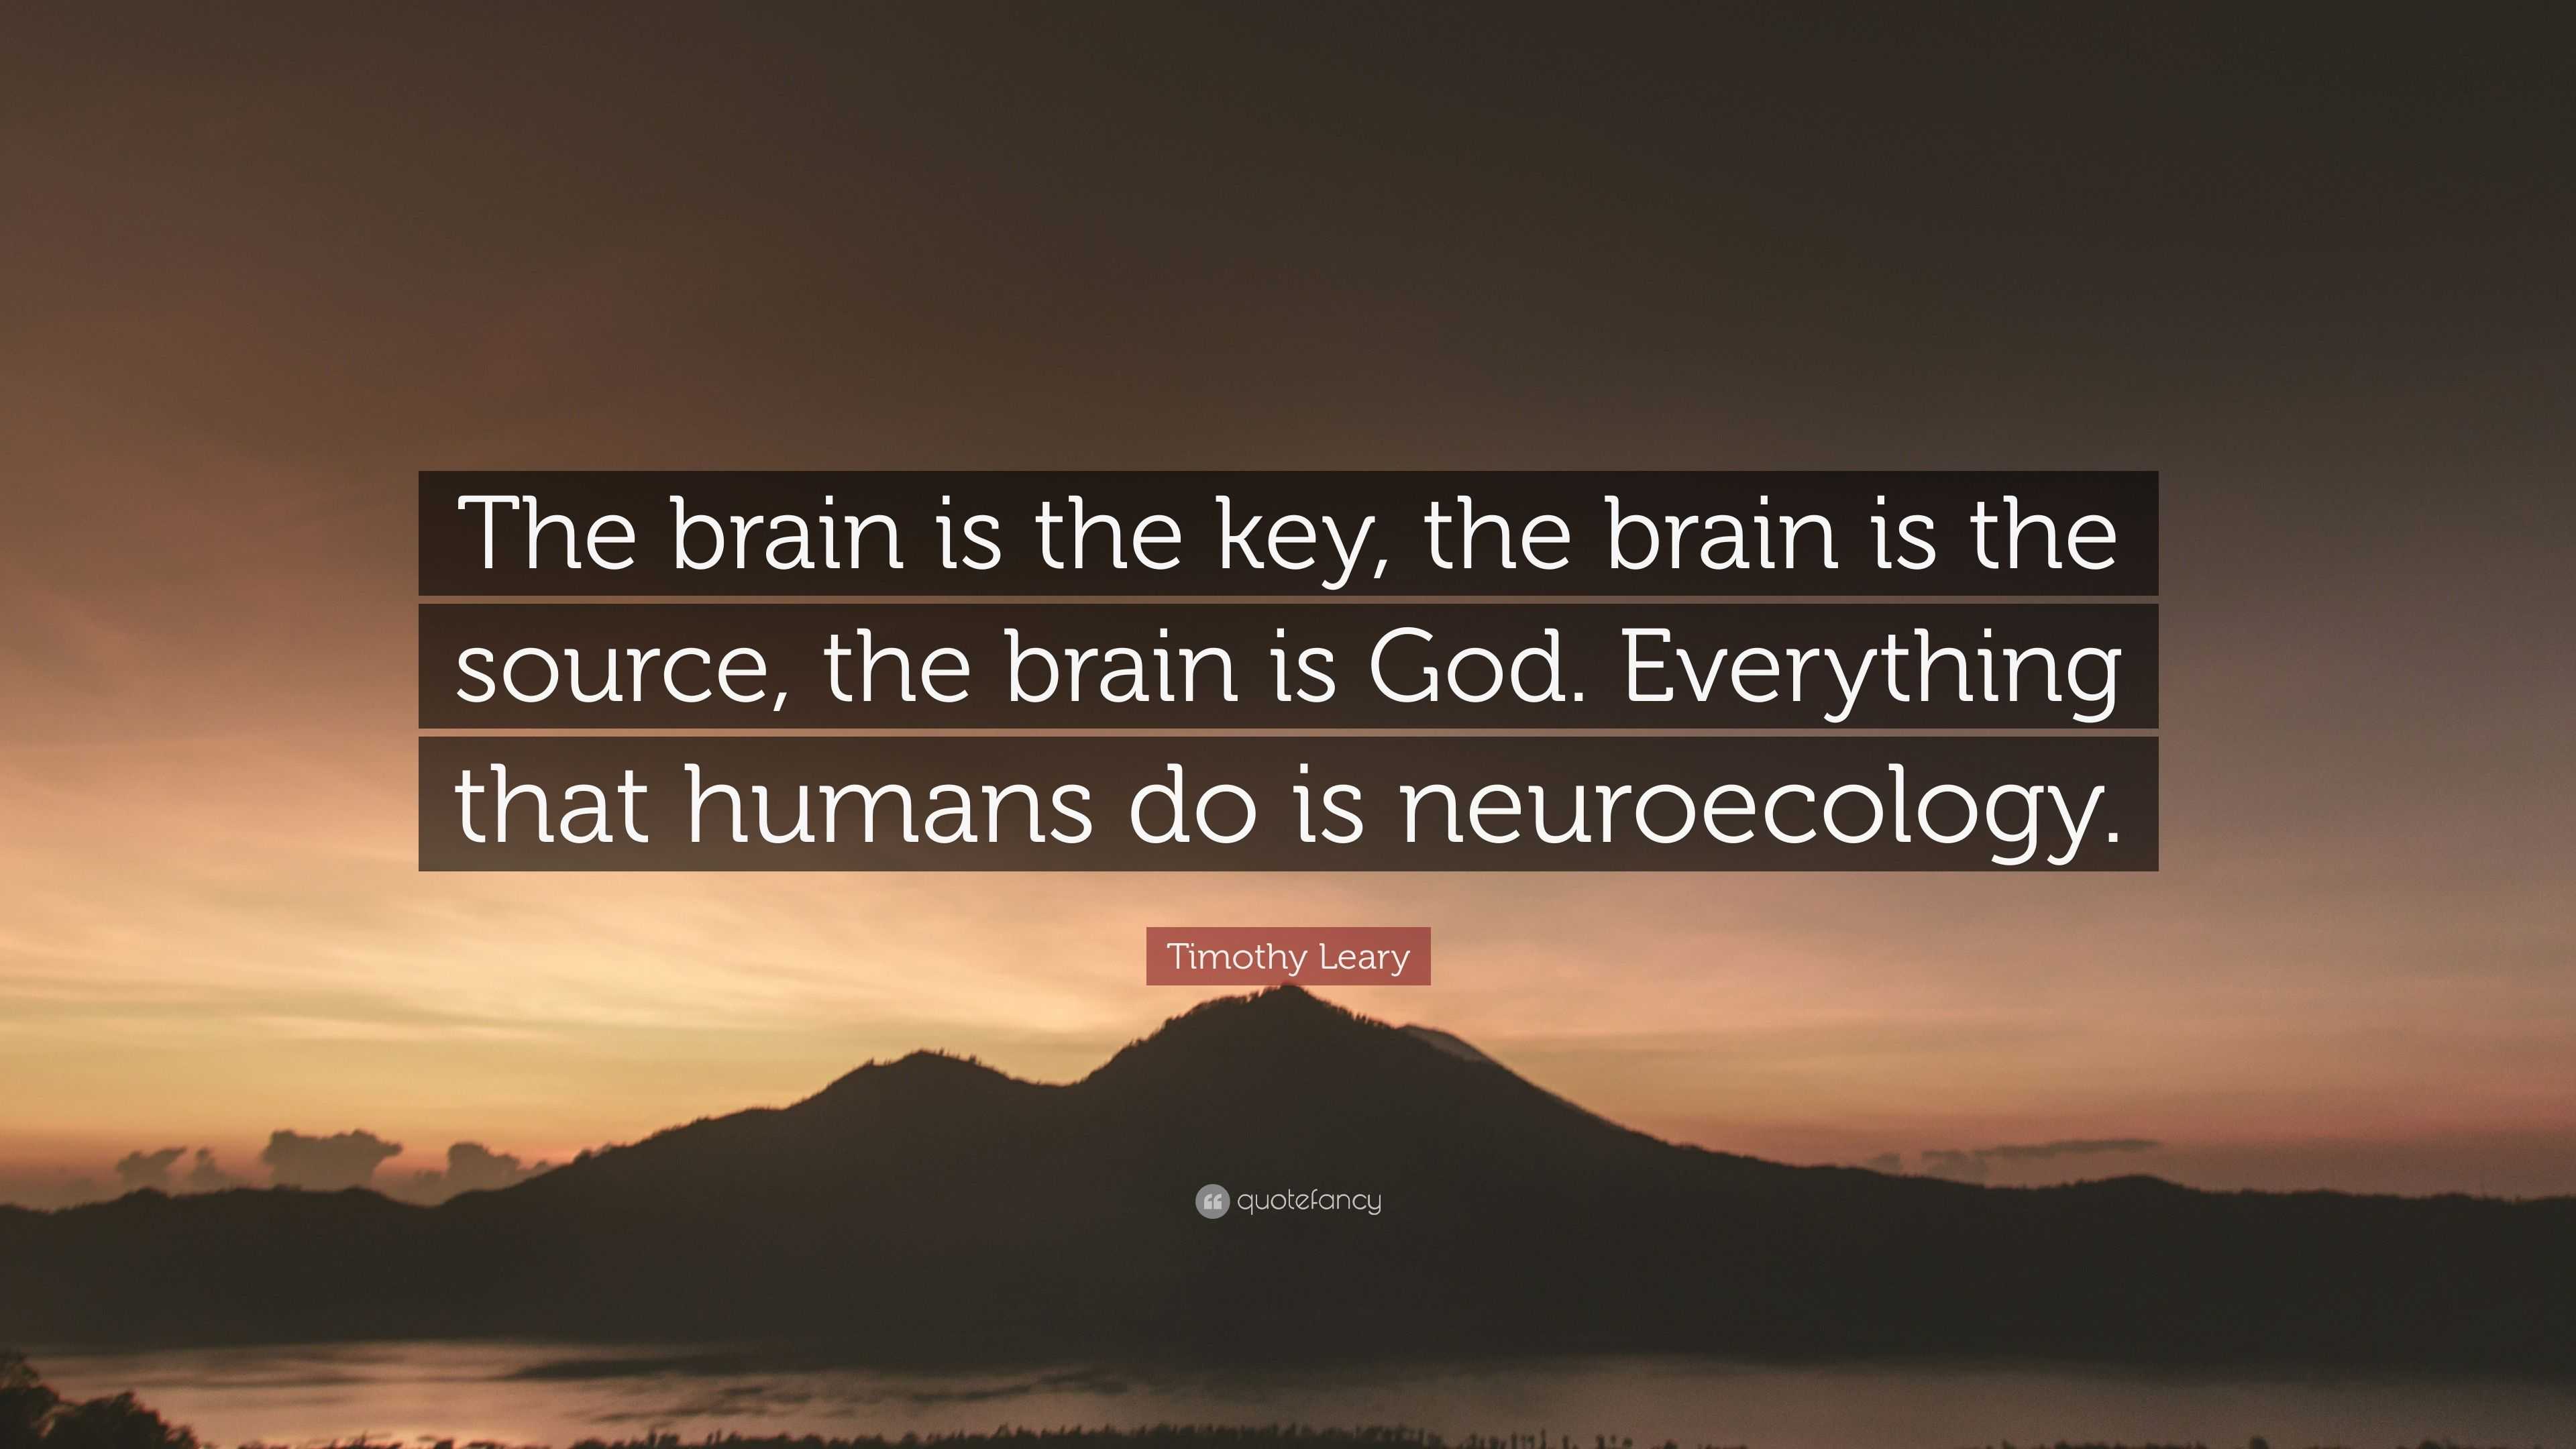 Timothy Leary Quote “the Brain Is The Key The Brain Is The Source The Brain Is God